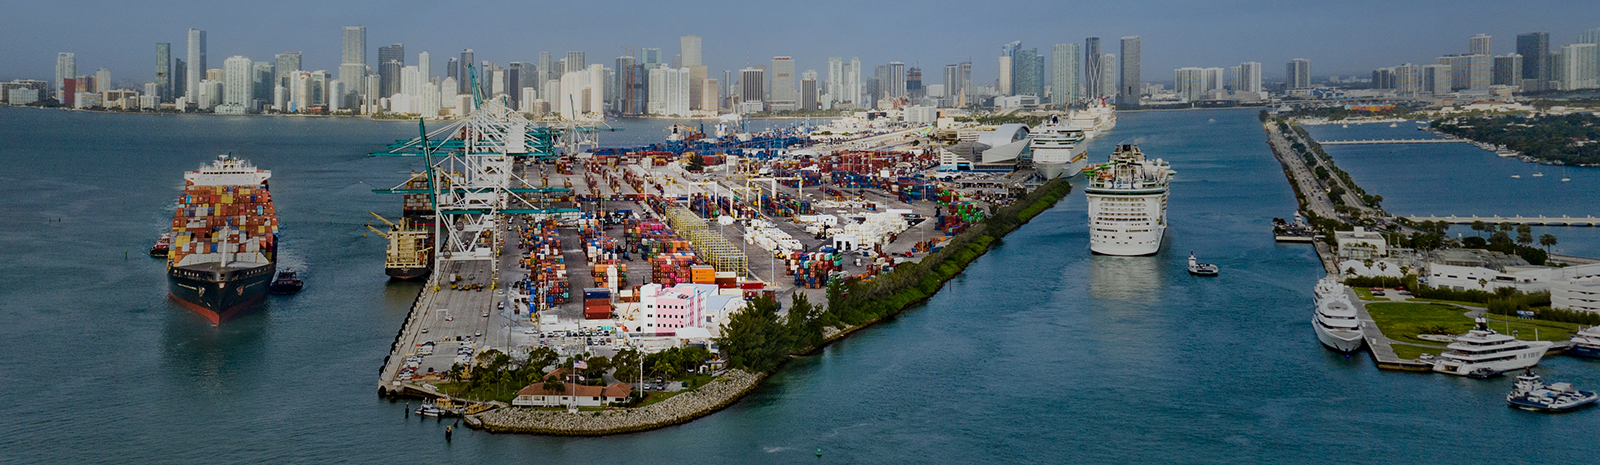 port of miami with cruise ship and miami skyline